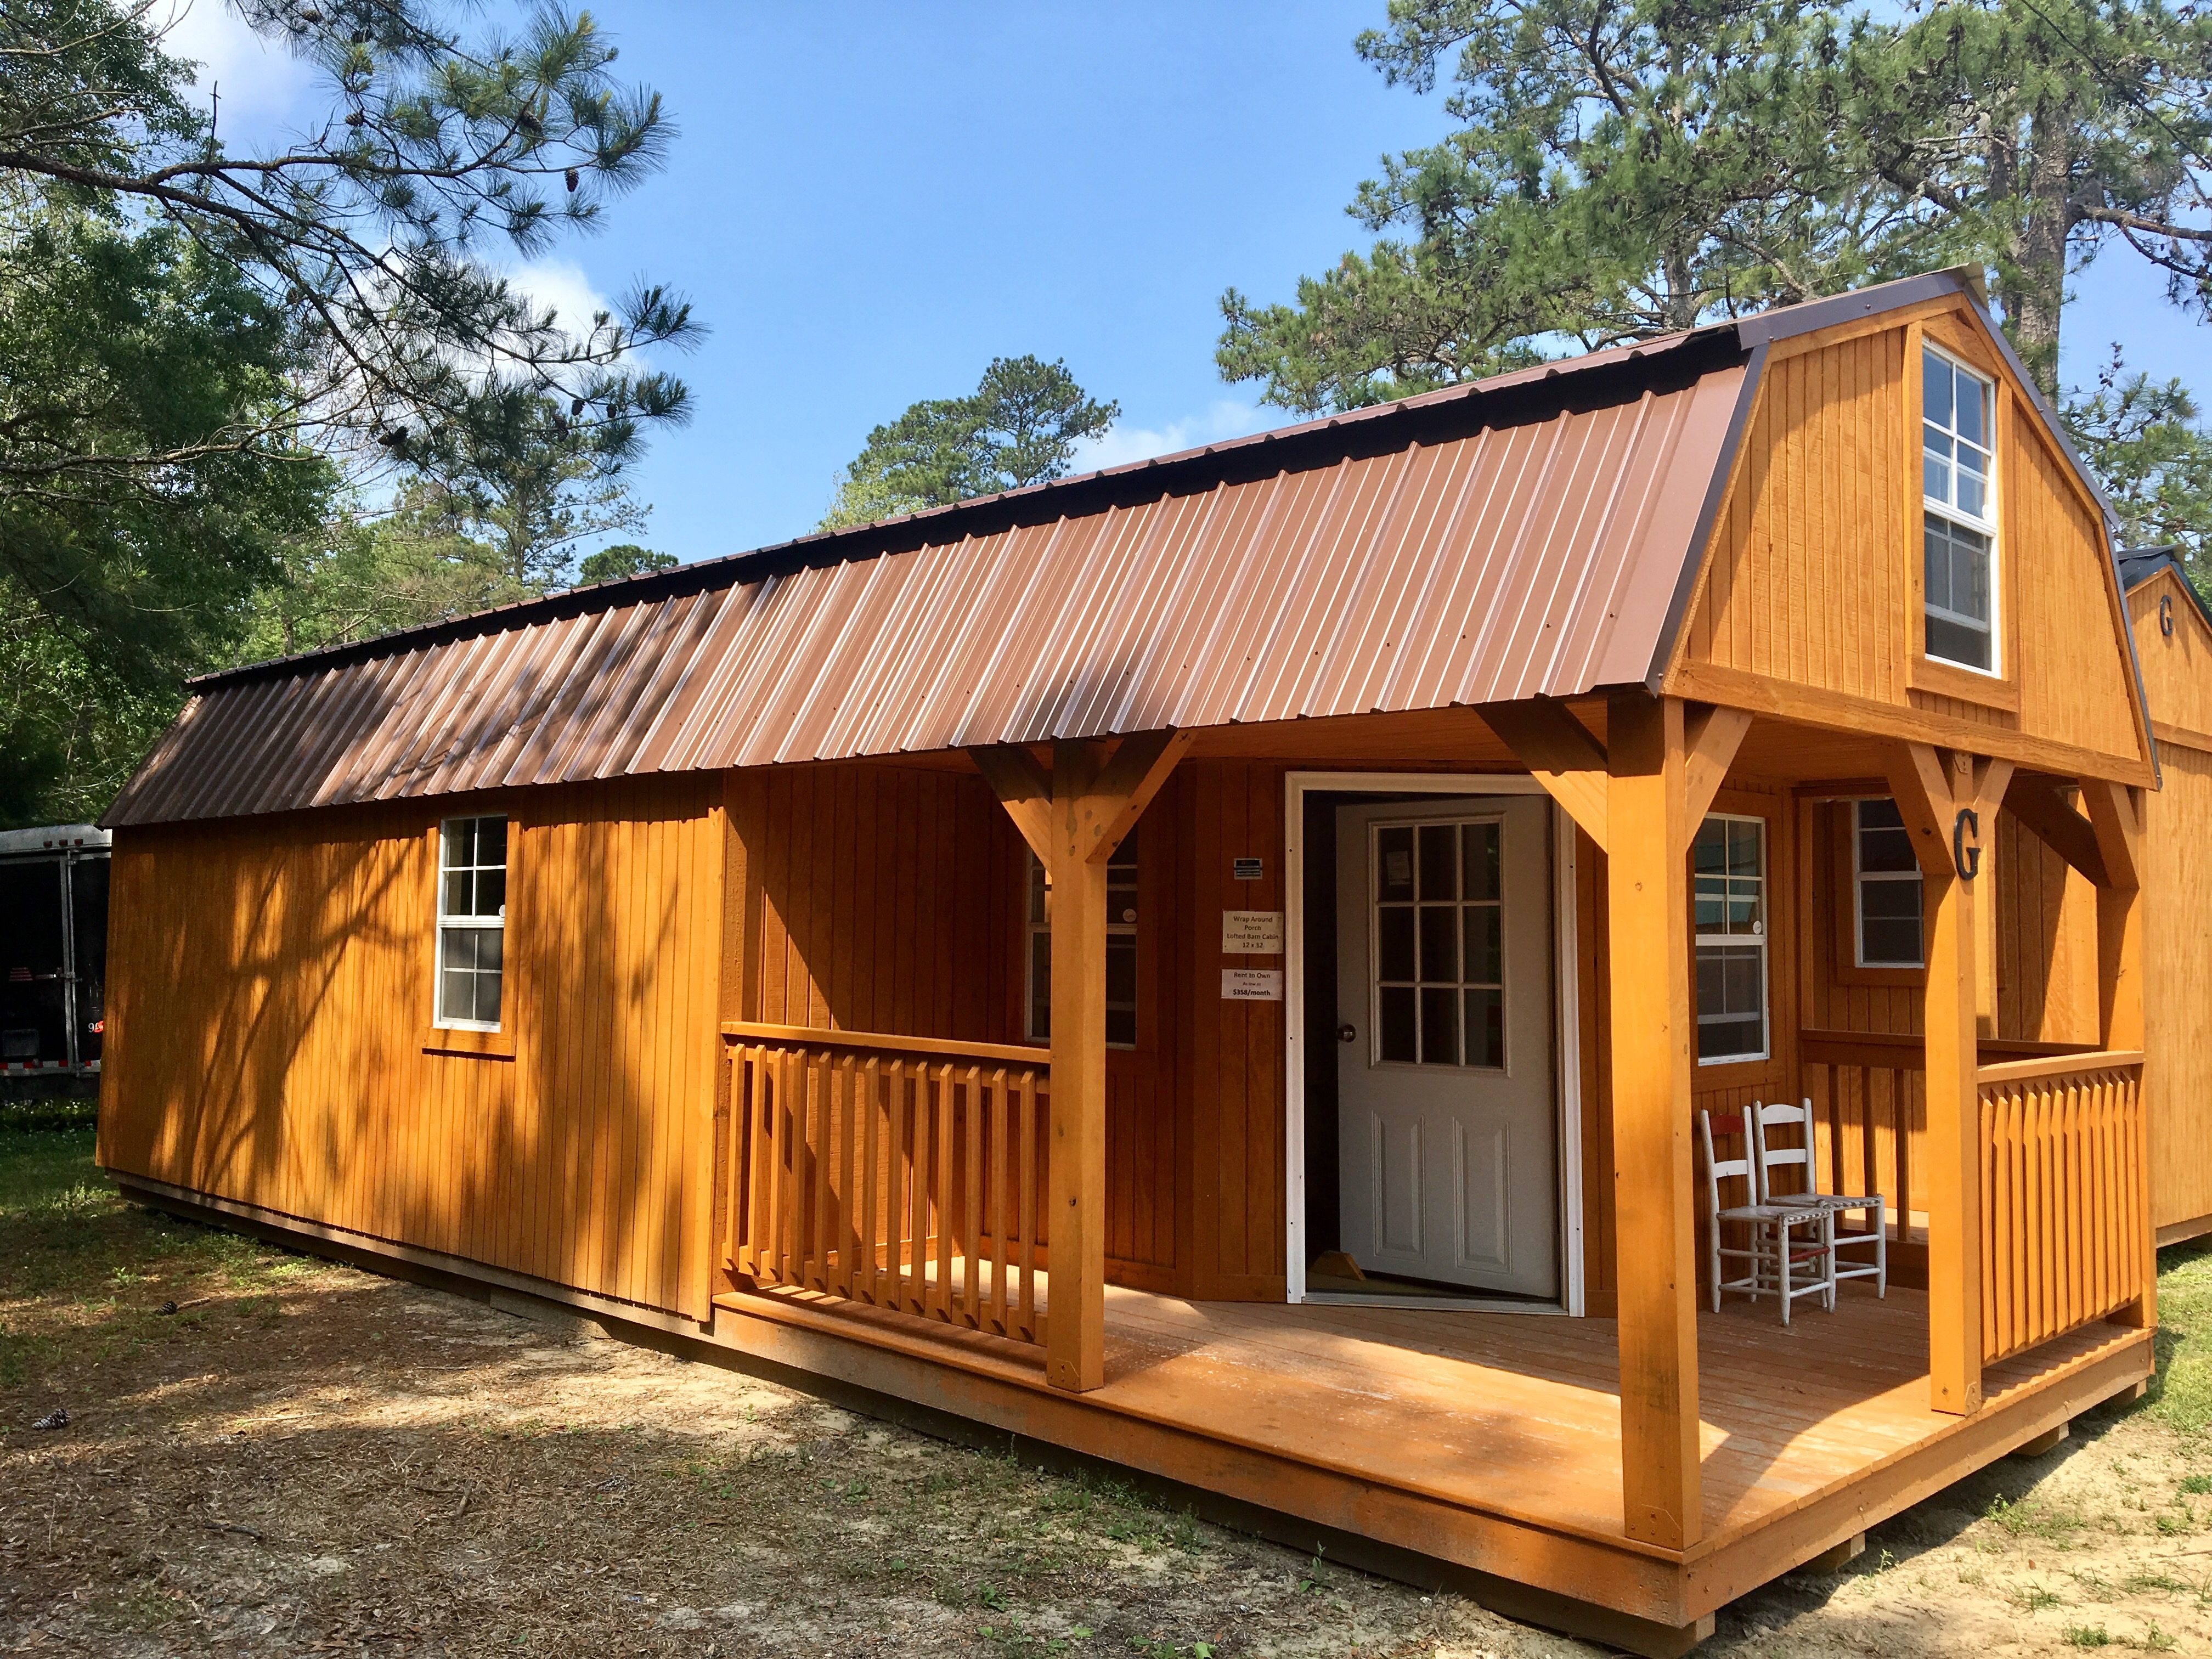 Best Sheds for Sale Charleston SC | Wrap Around Lofted Cabin | Sheds